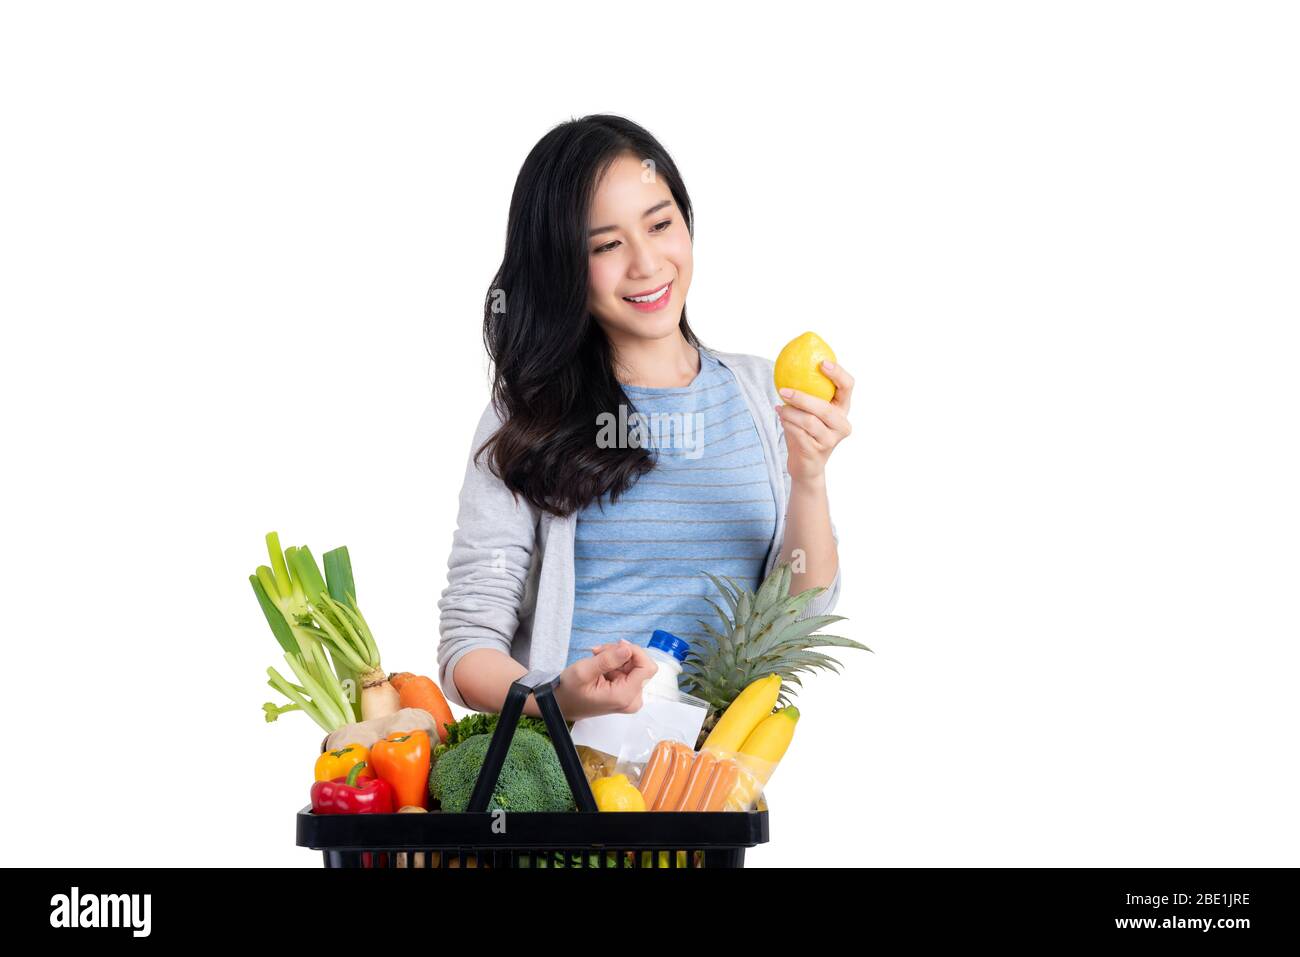 Beautiful Asian woman carrying basket shopping for food and groceries isolated on white background Stock Photo